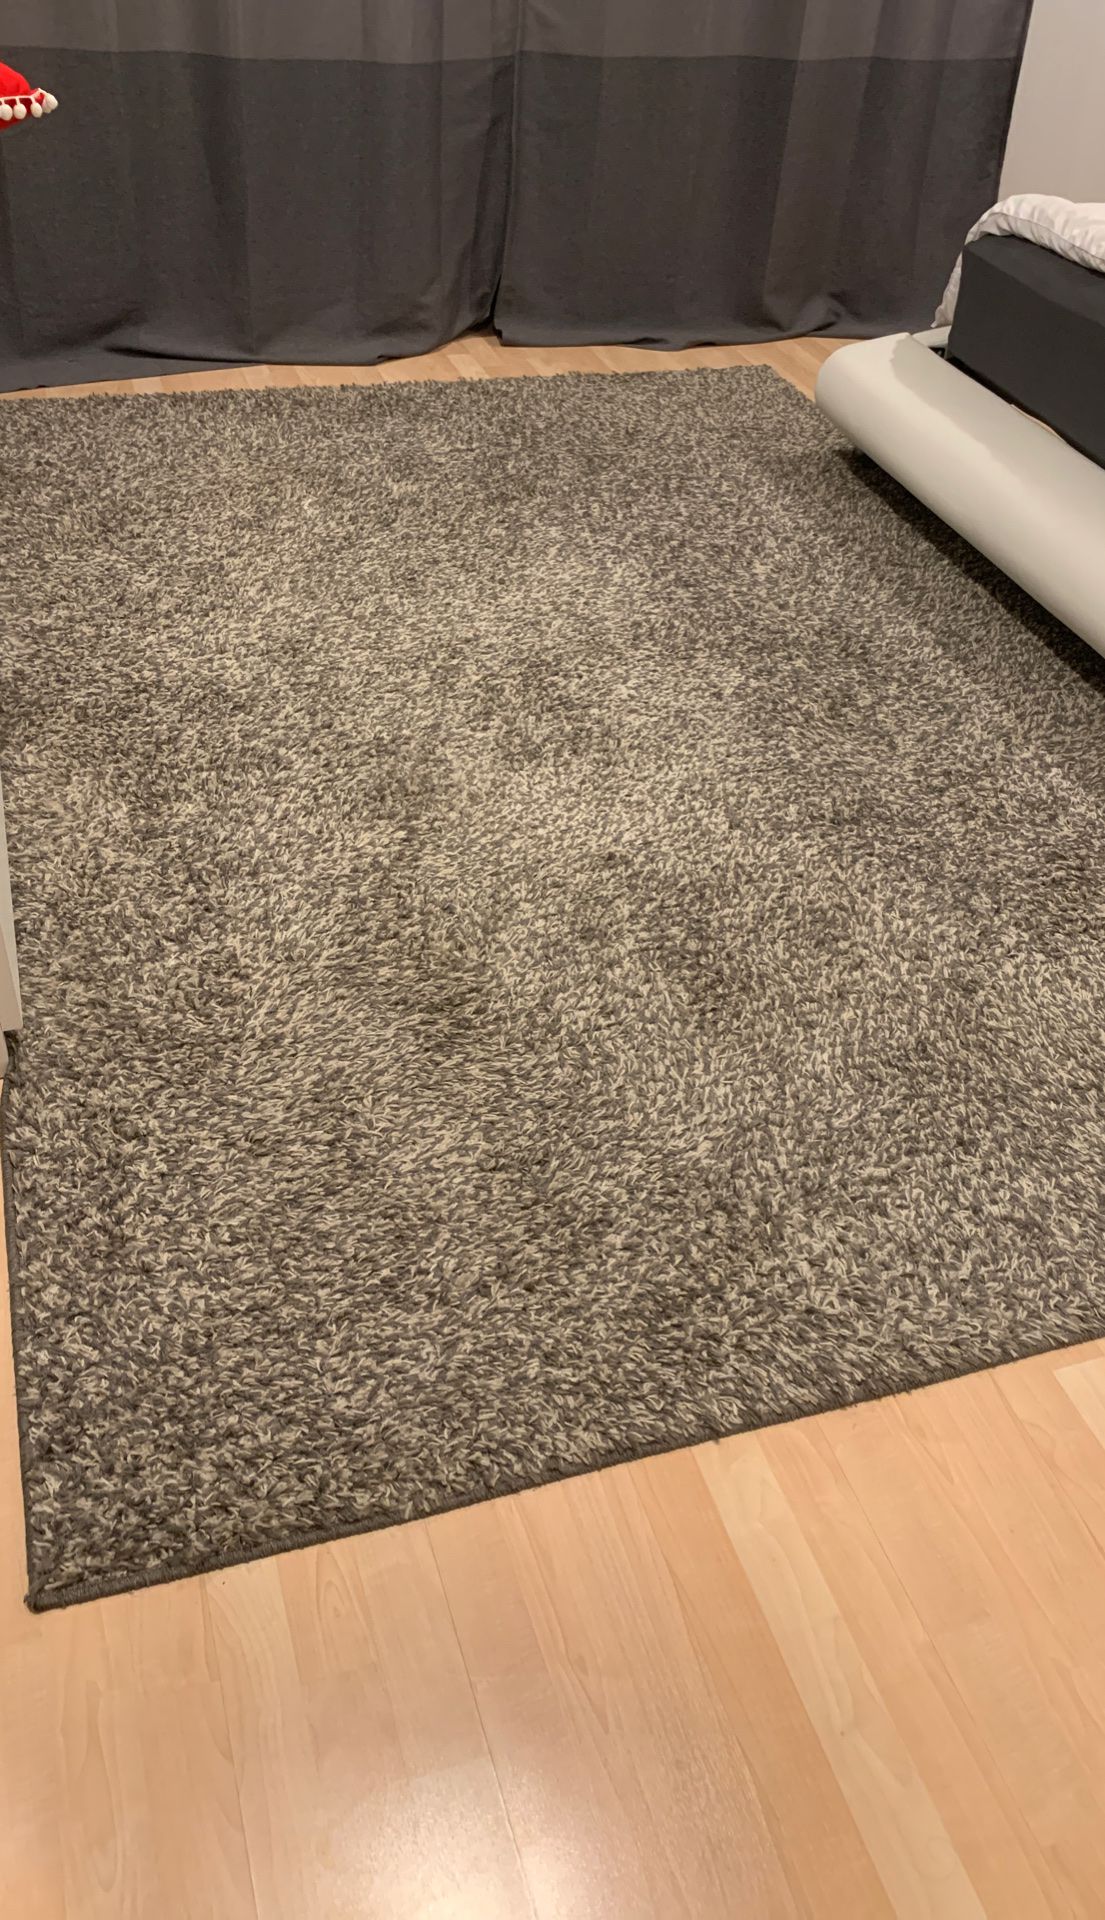 Gray and white rug